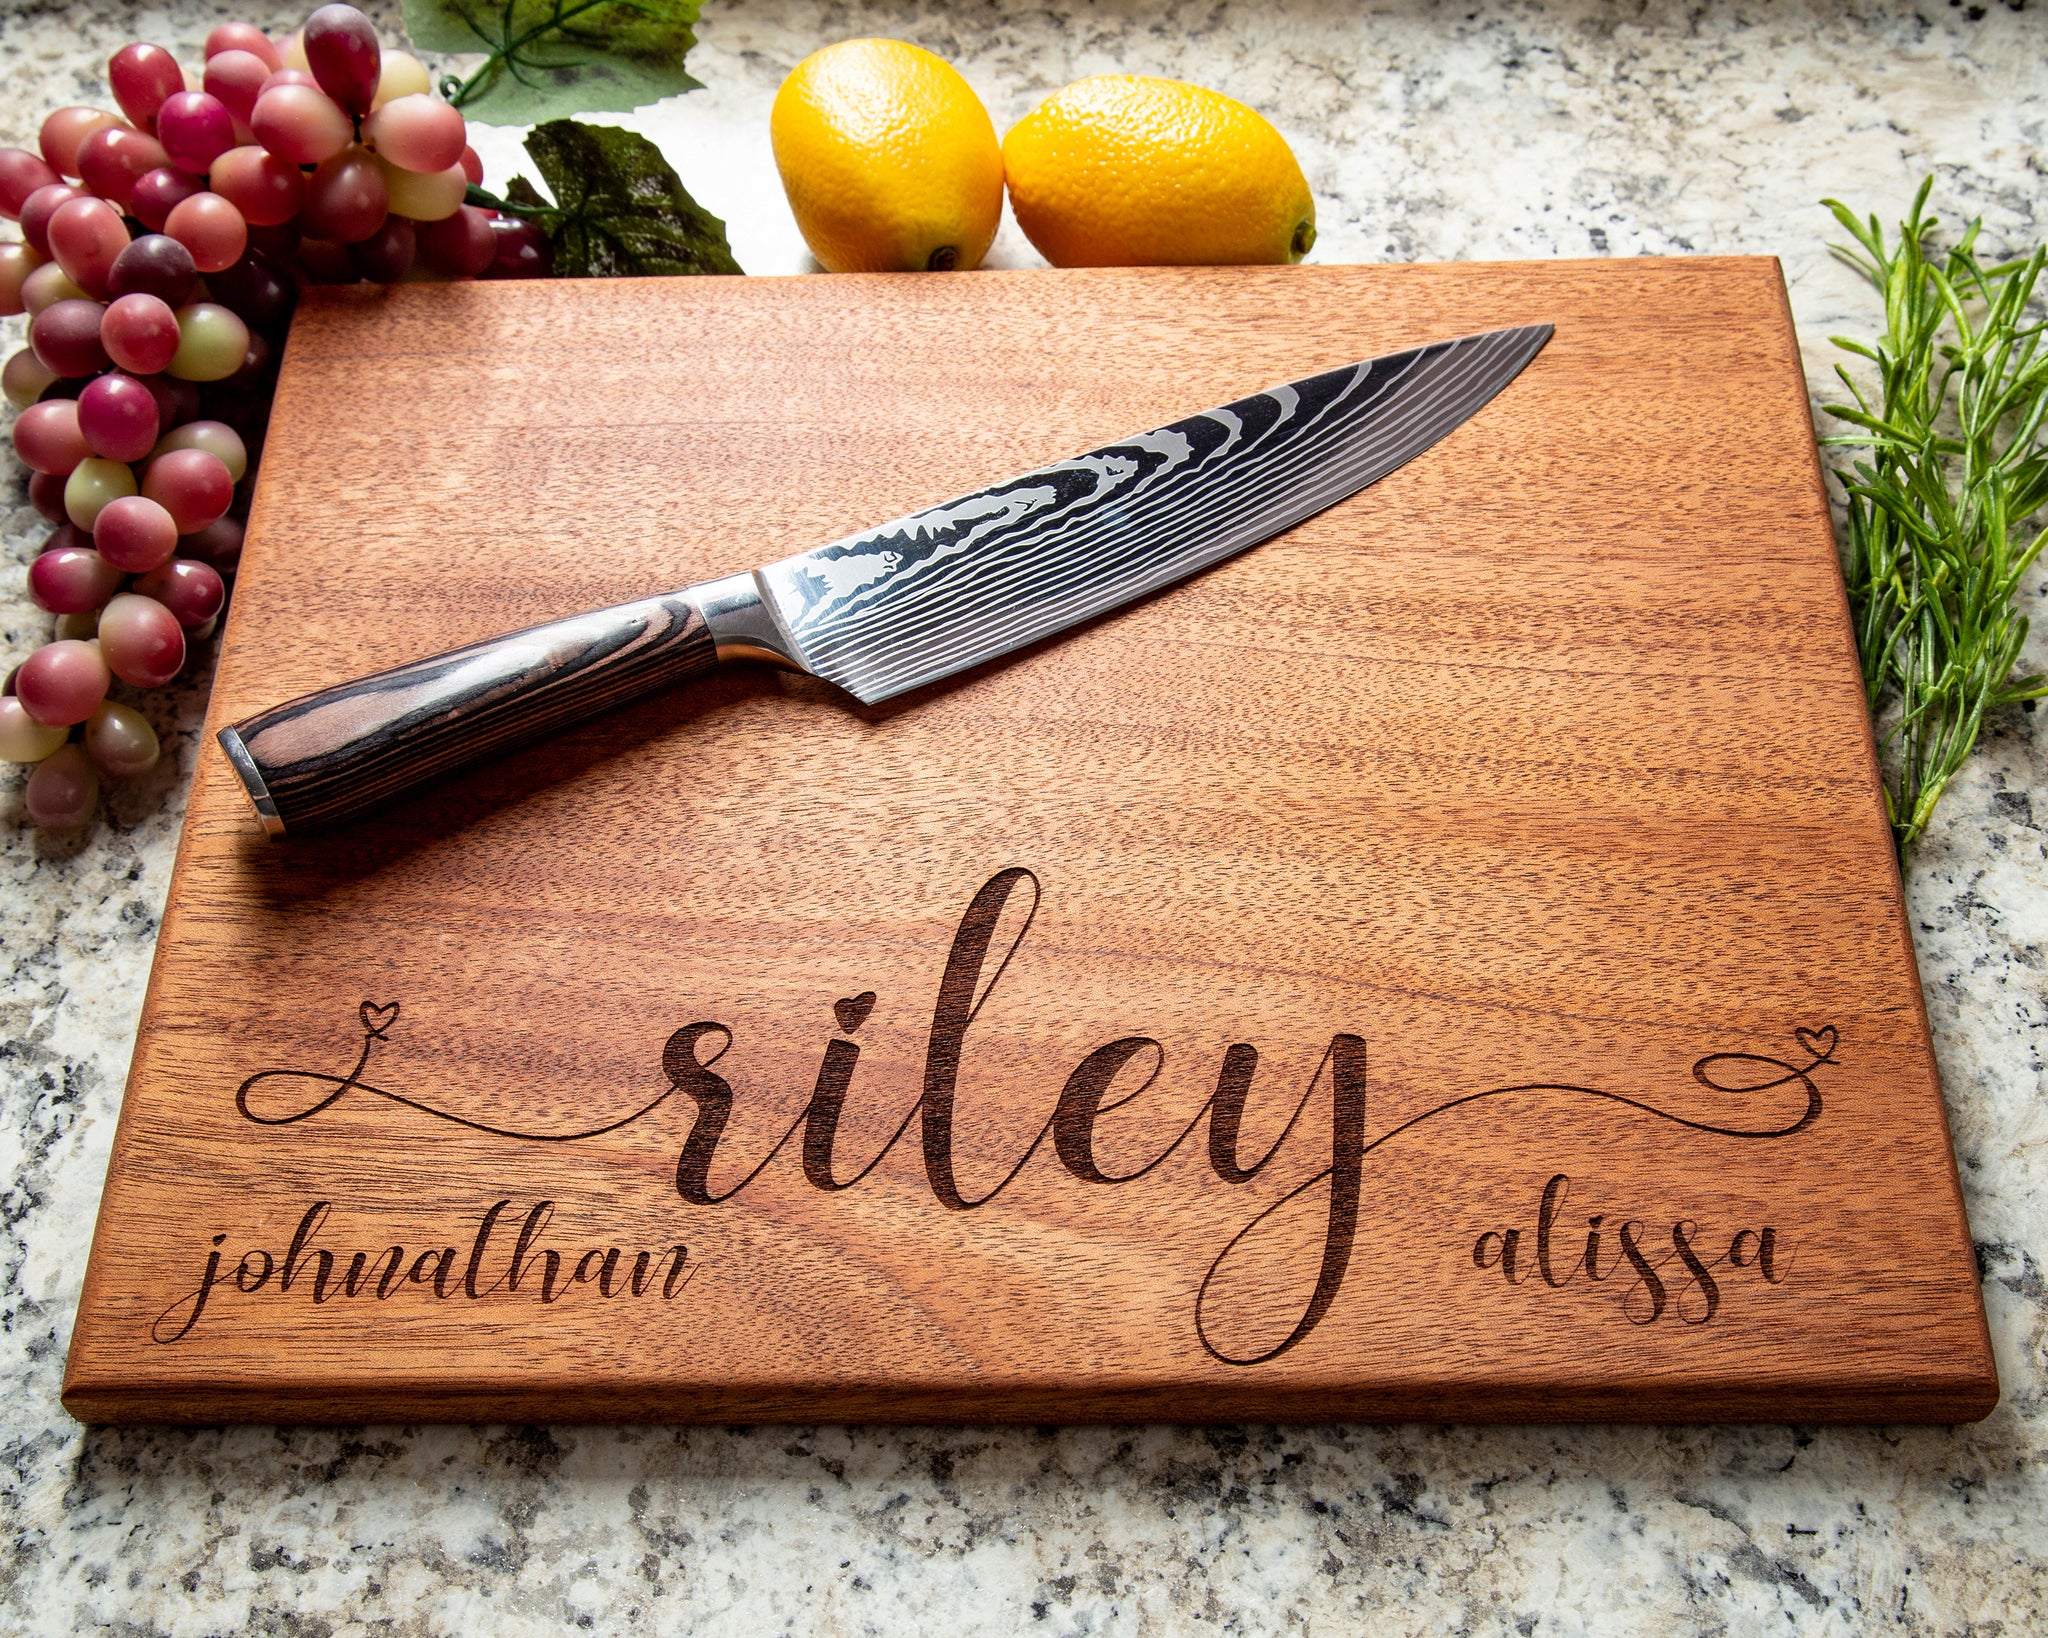 Unforgettable Kitchen Knife Gifts: Engrave Your Way to Their Hearts!